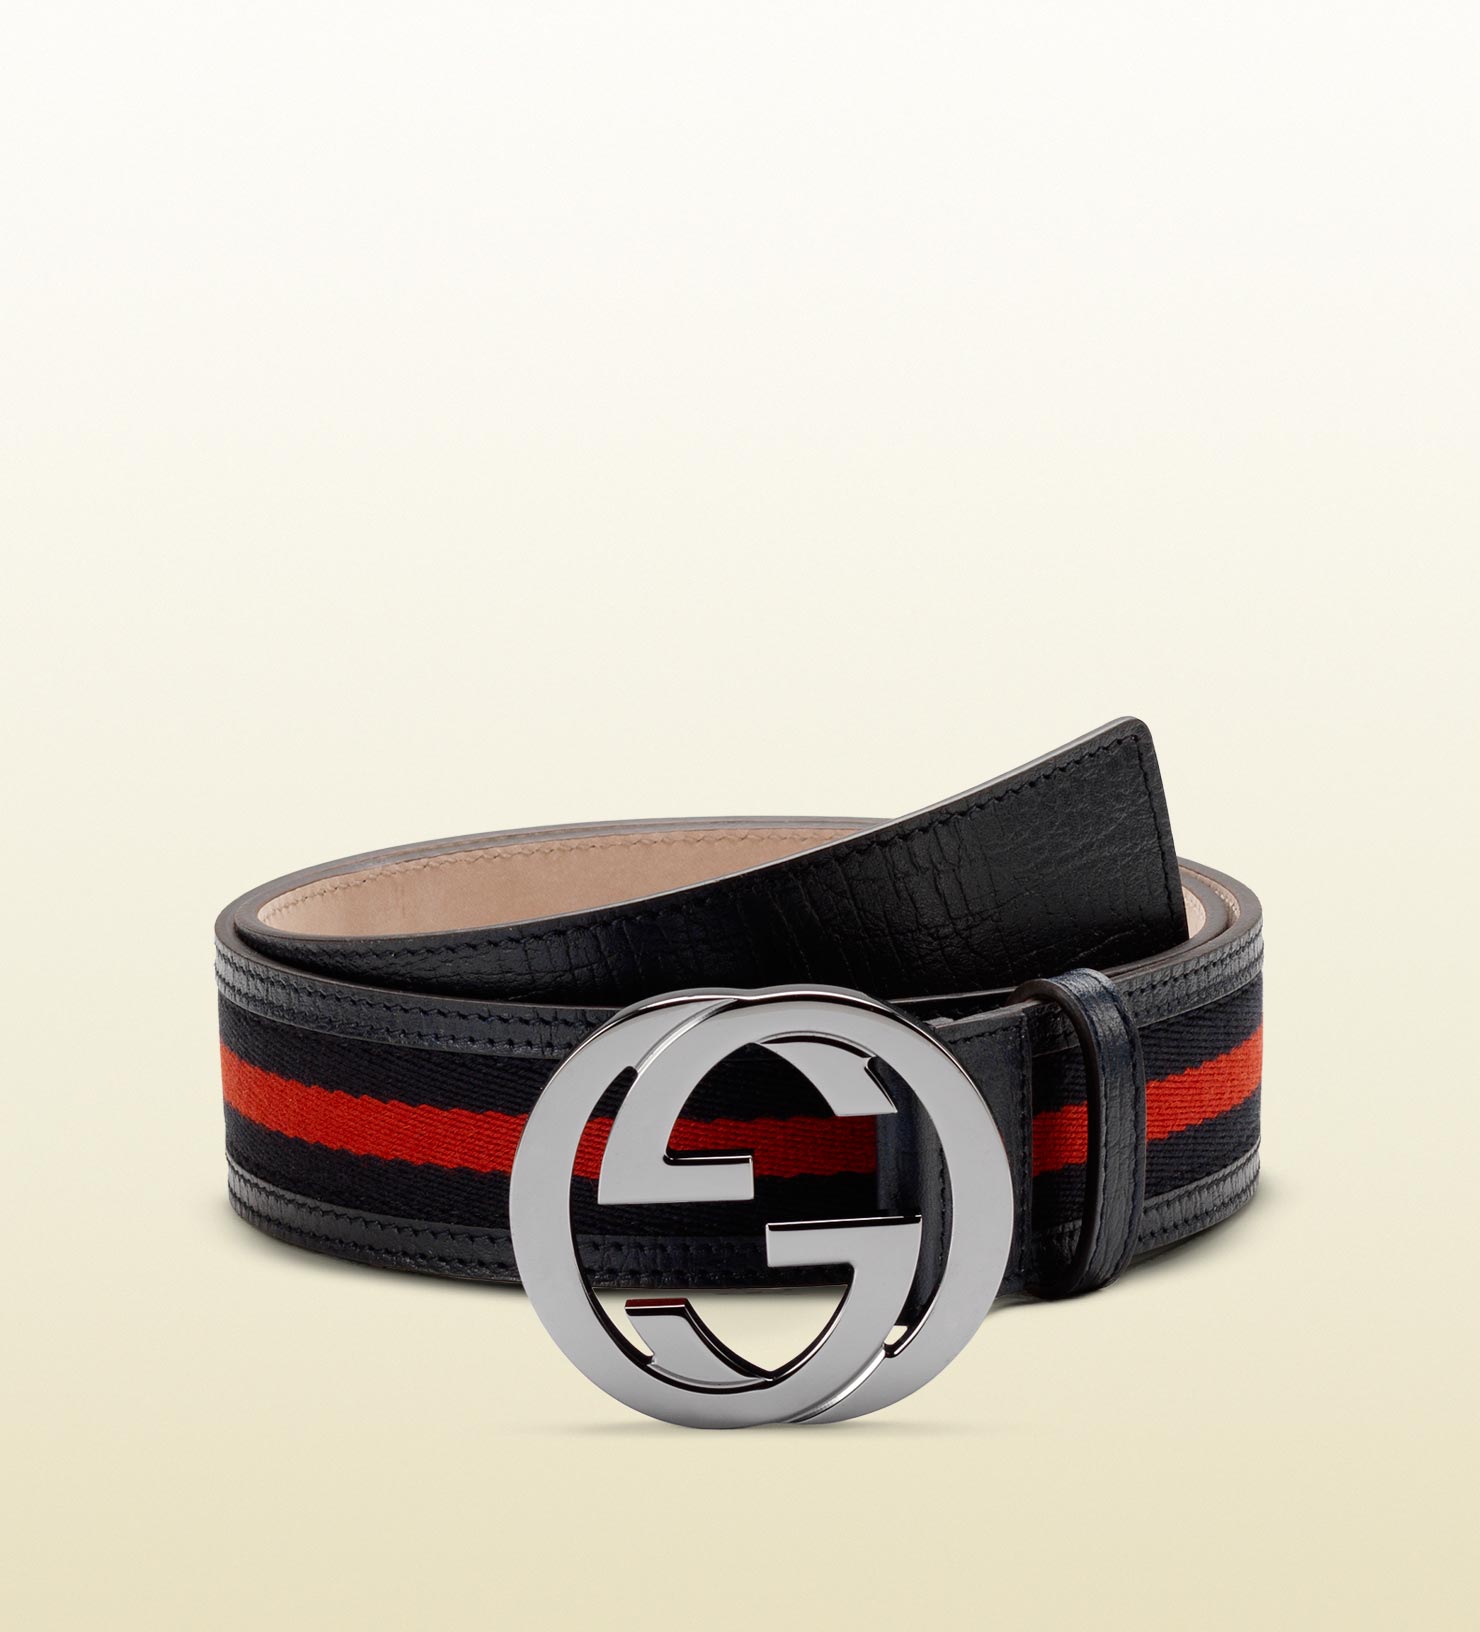 Lyst - Gucci Signature Web Belt With Interlocking G Buckle in Black for Men